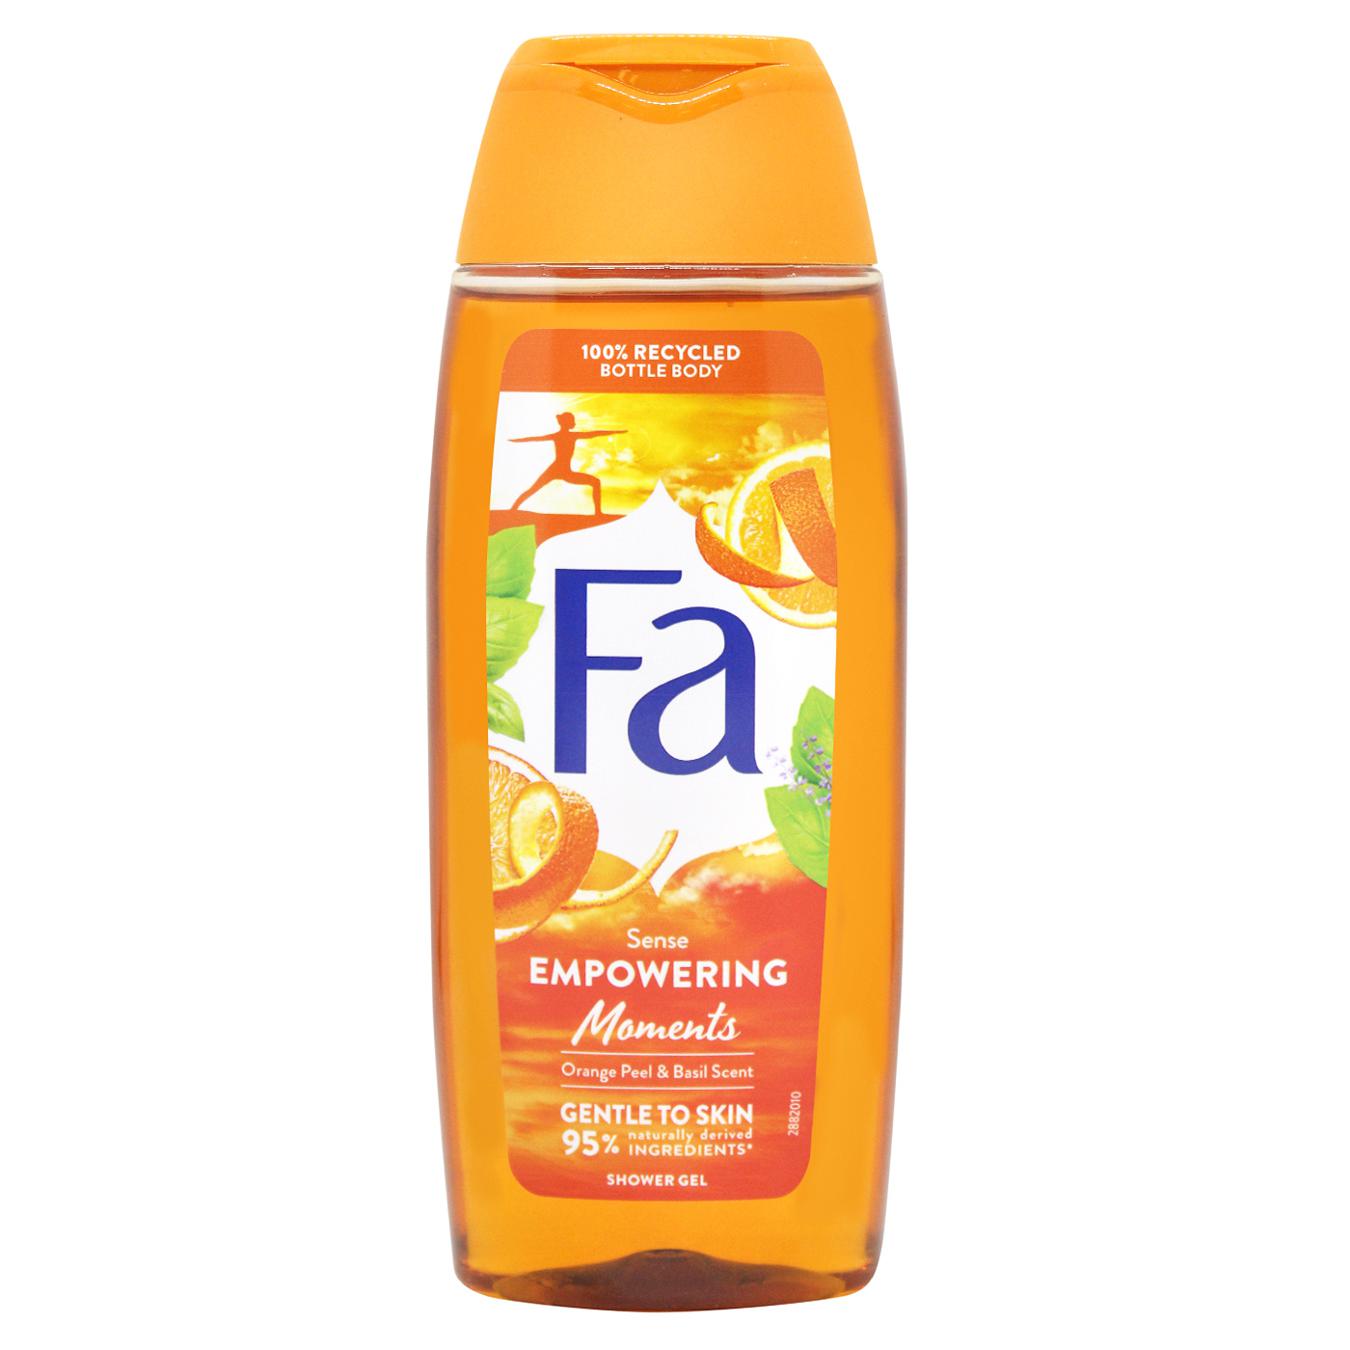 Shower gel Fa empowering moments aroma of zest and basil 250 ml